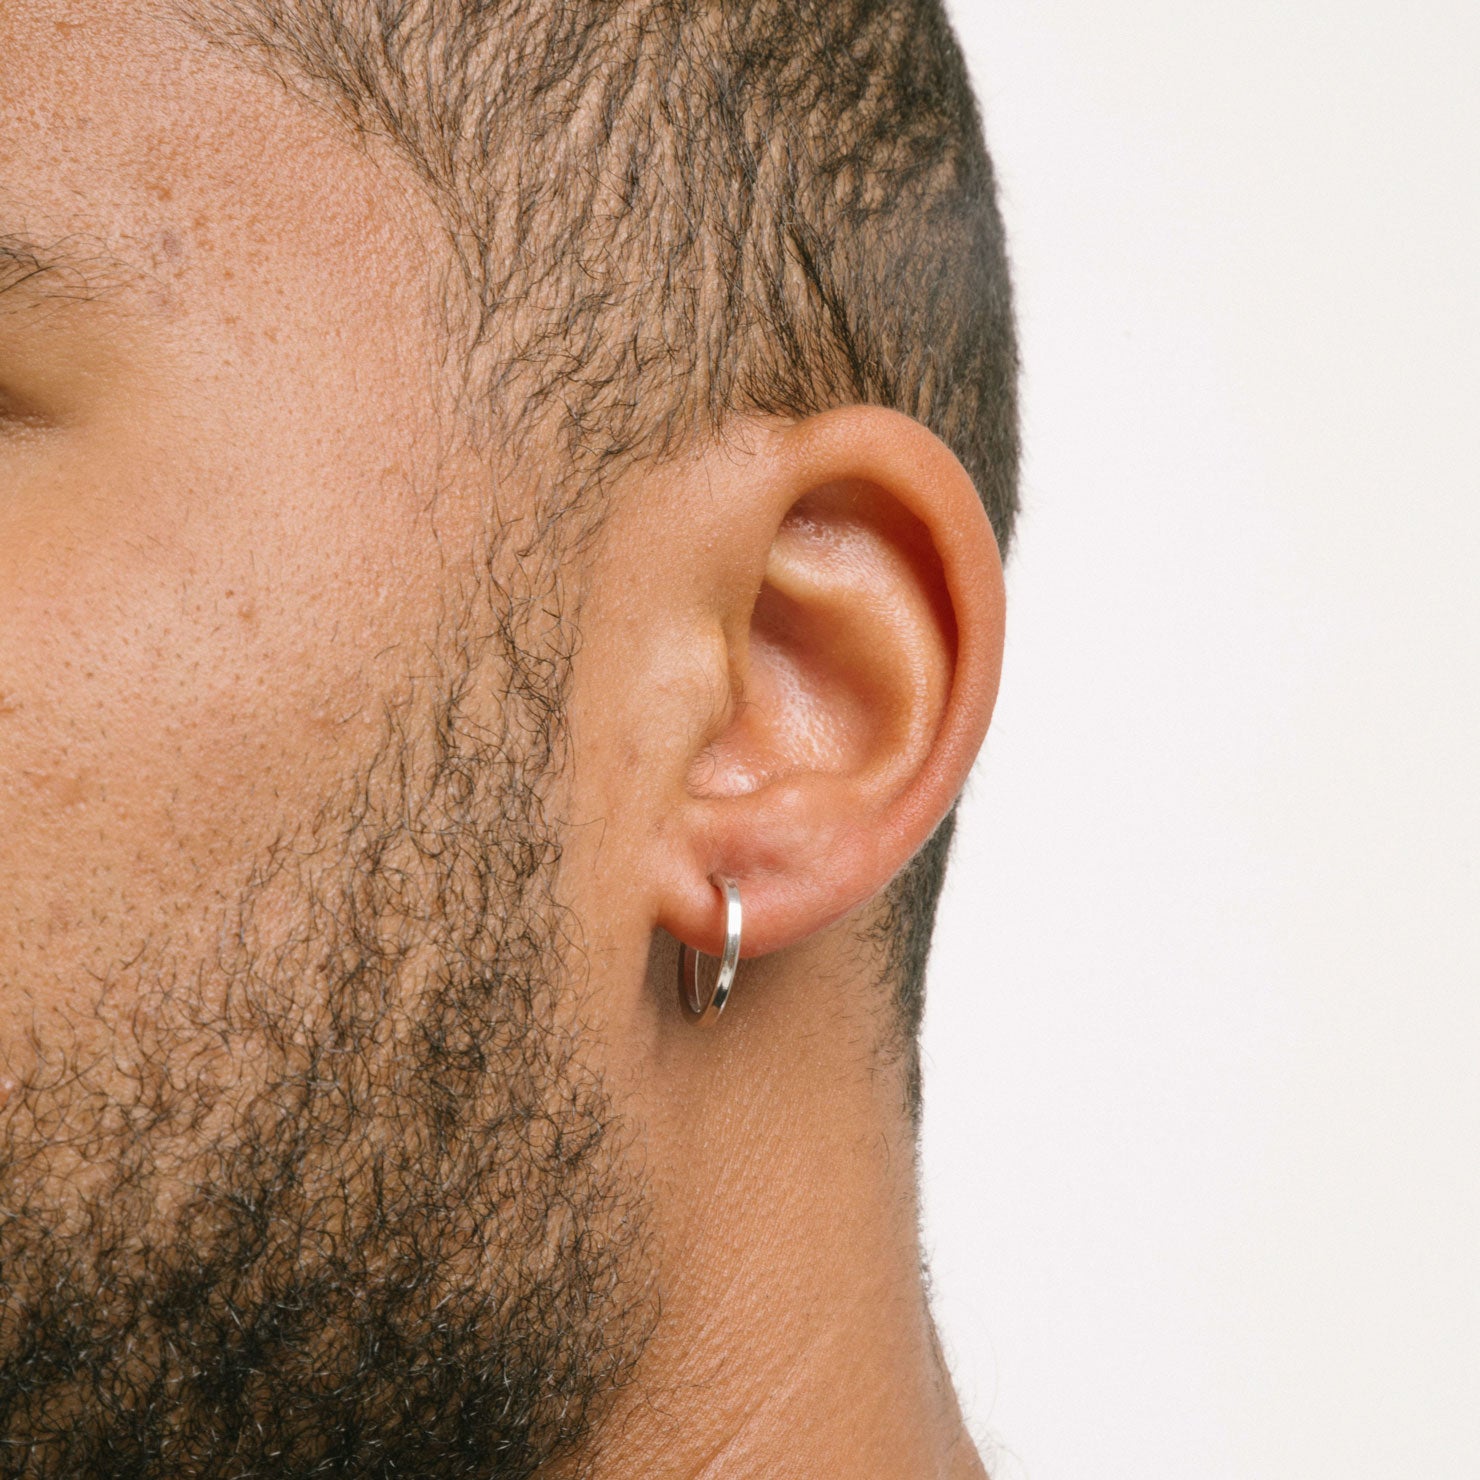 A model wearing the Classic Hoop Clip On Earrings feature a sliding spring closure that is ideal for small or thin ear lobes. The secure hold enables comfortable wear up to 4 hours, and the design automatically adjusts to the thickness of the ear. Crafted from stainless steel, the earrings come as a single pair.